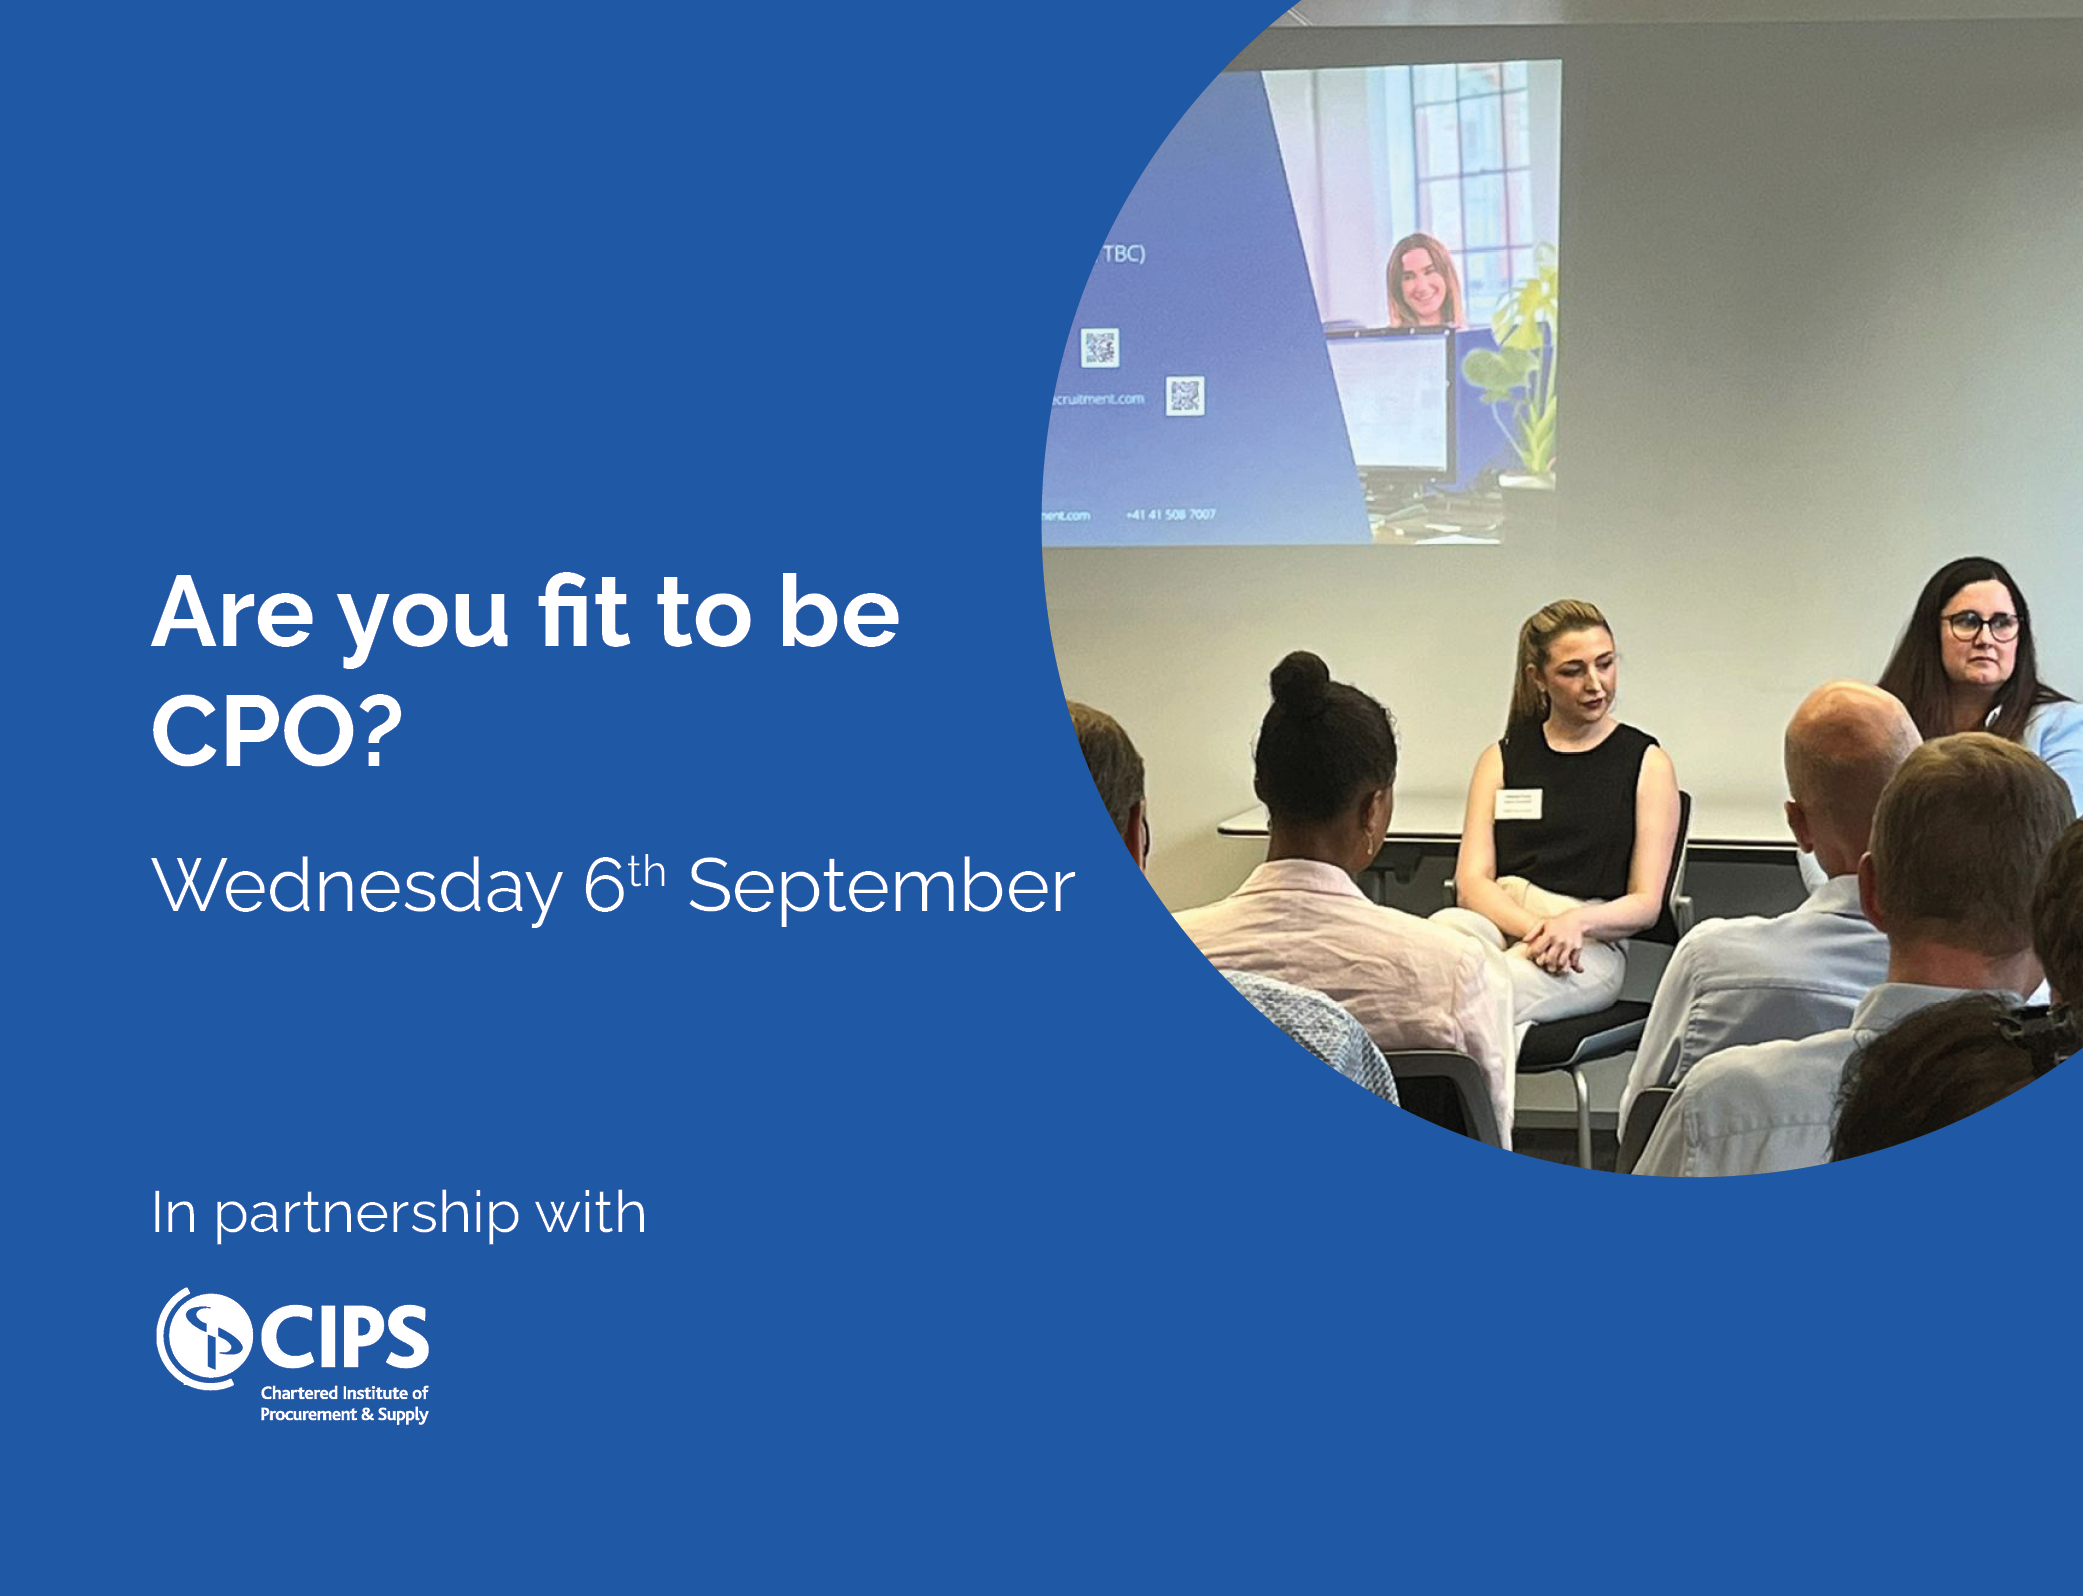 Are you fit to be CPO?